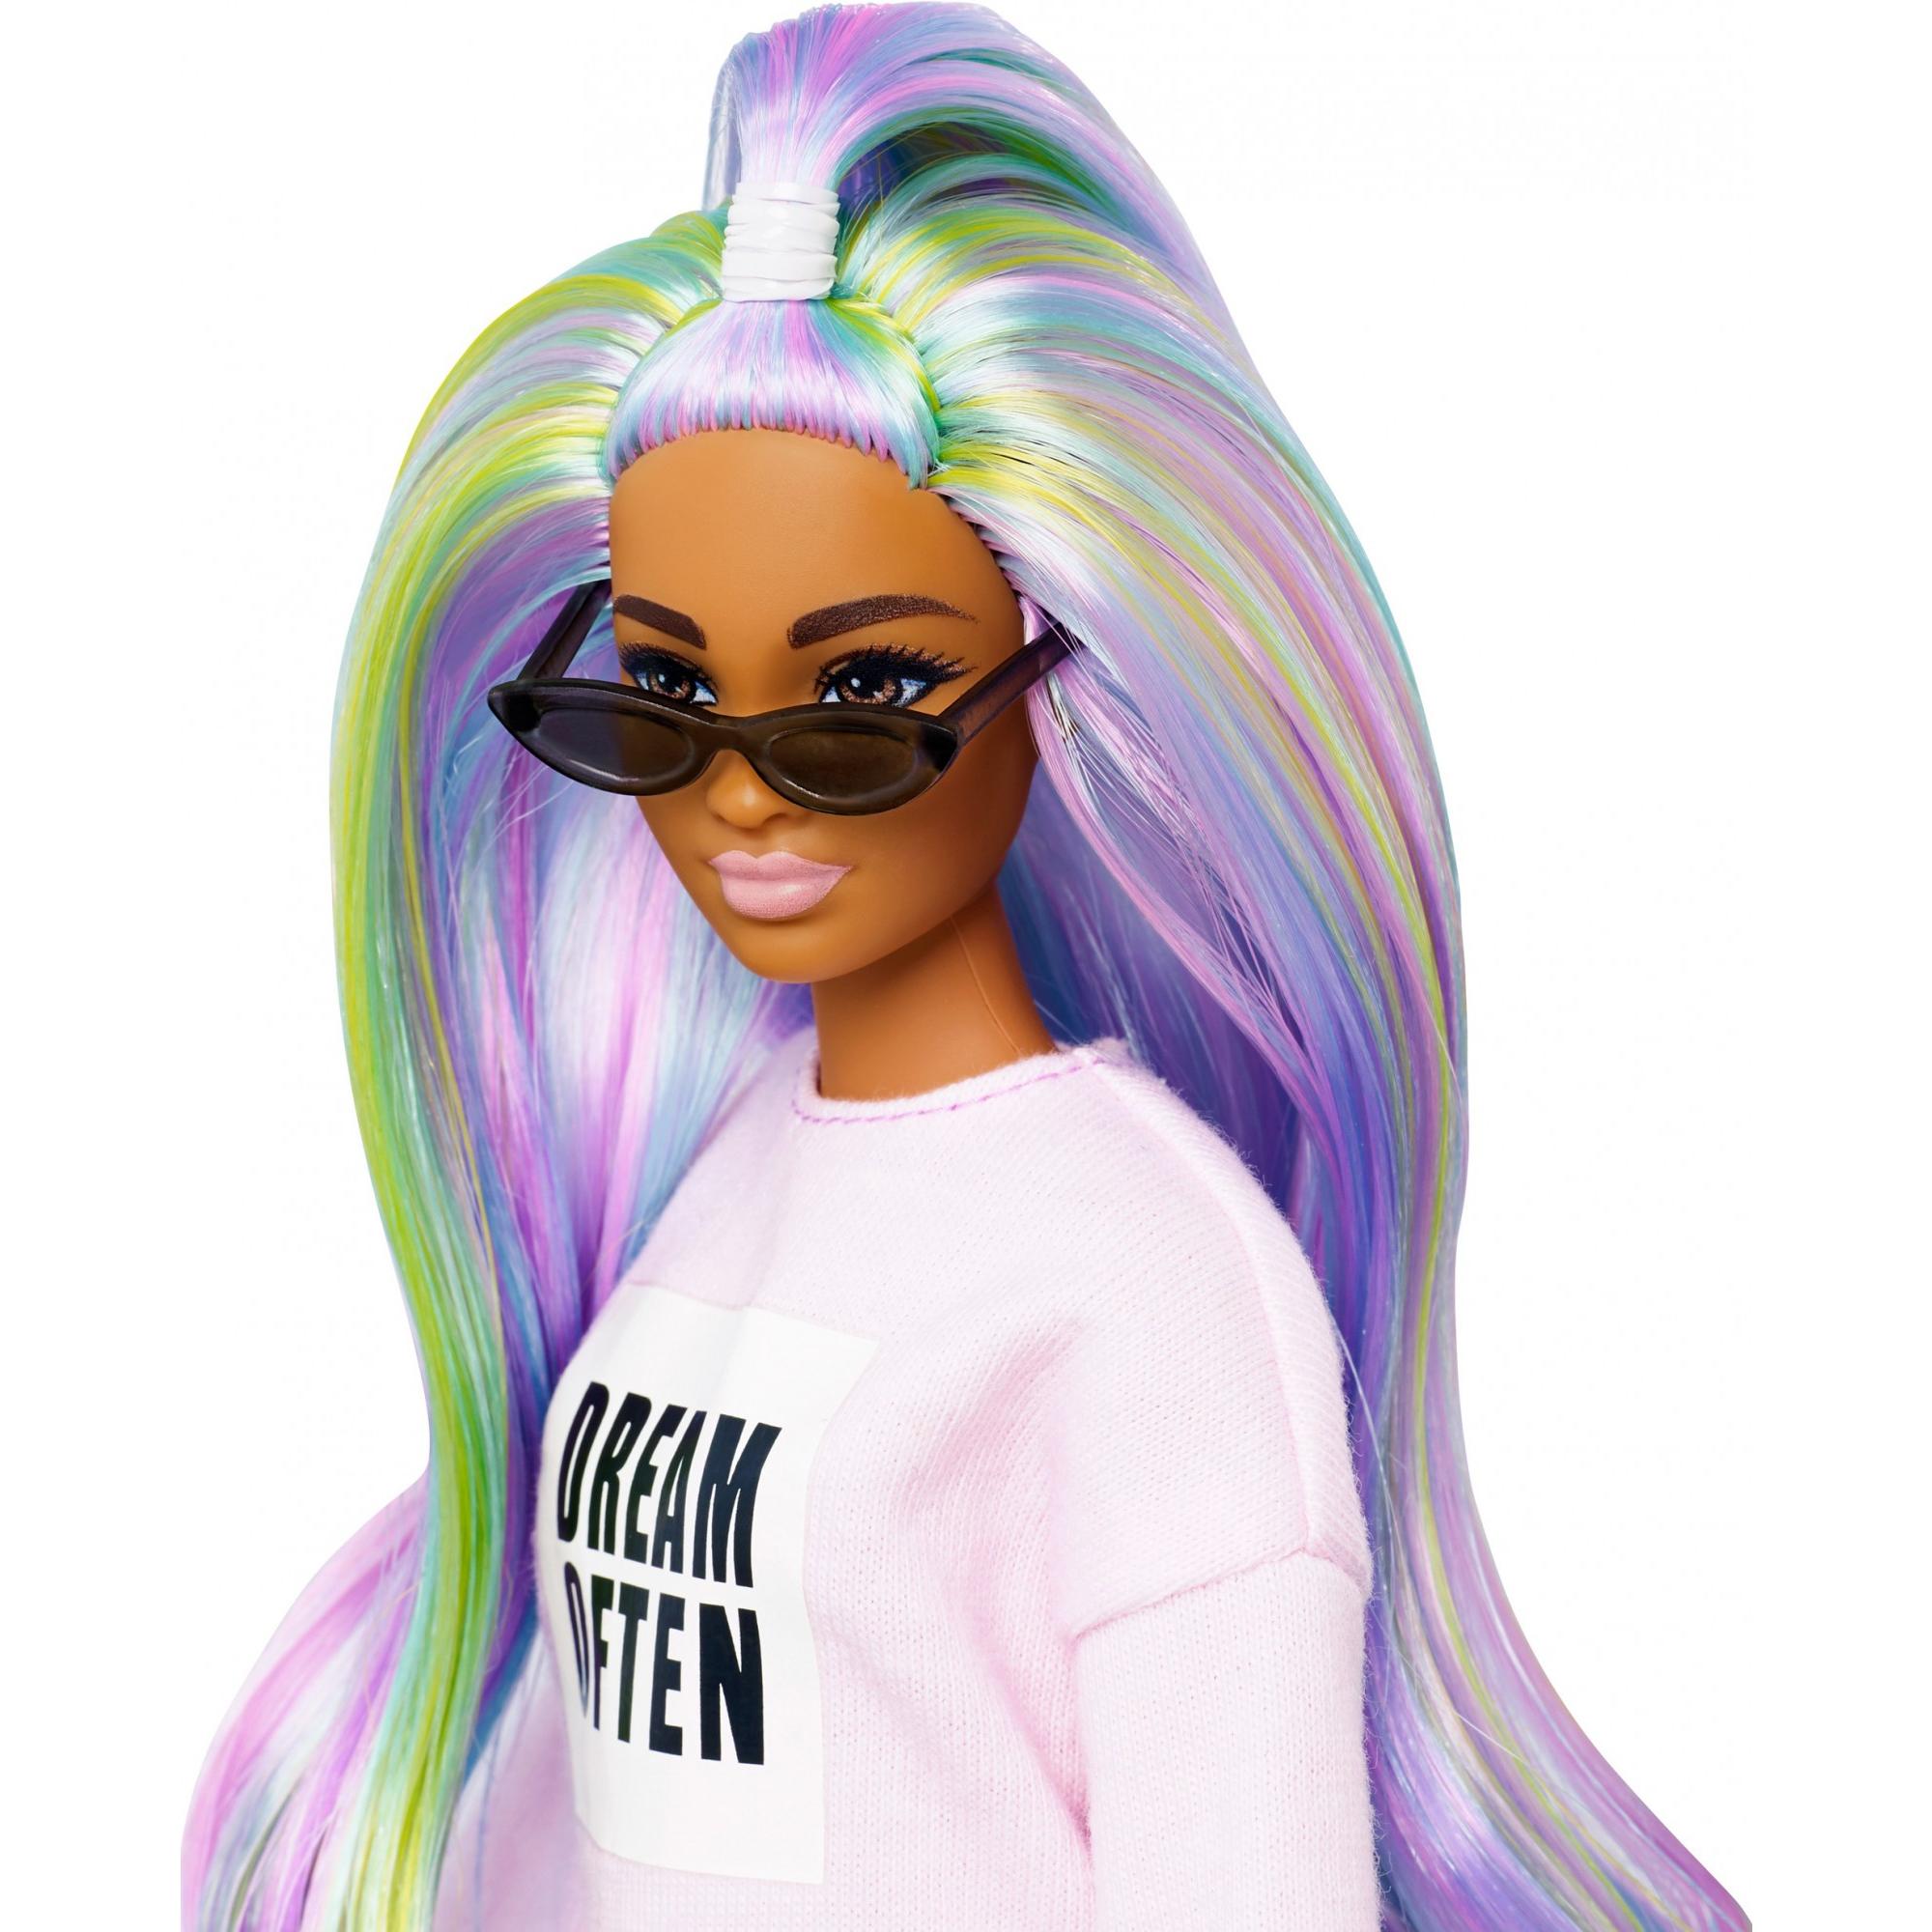 Barbie Fashionistas Doll #136 With Long Rainbow Hair - image 4 of 7